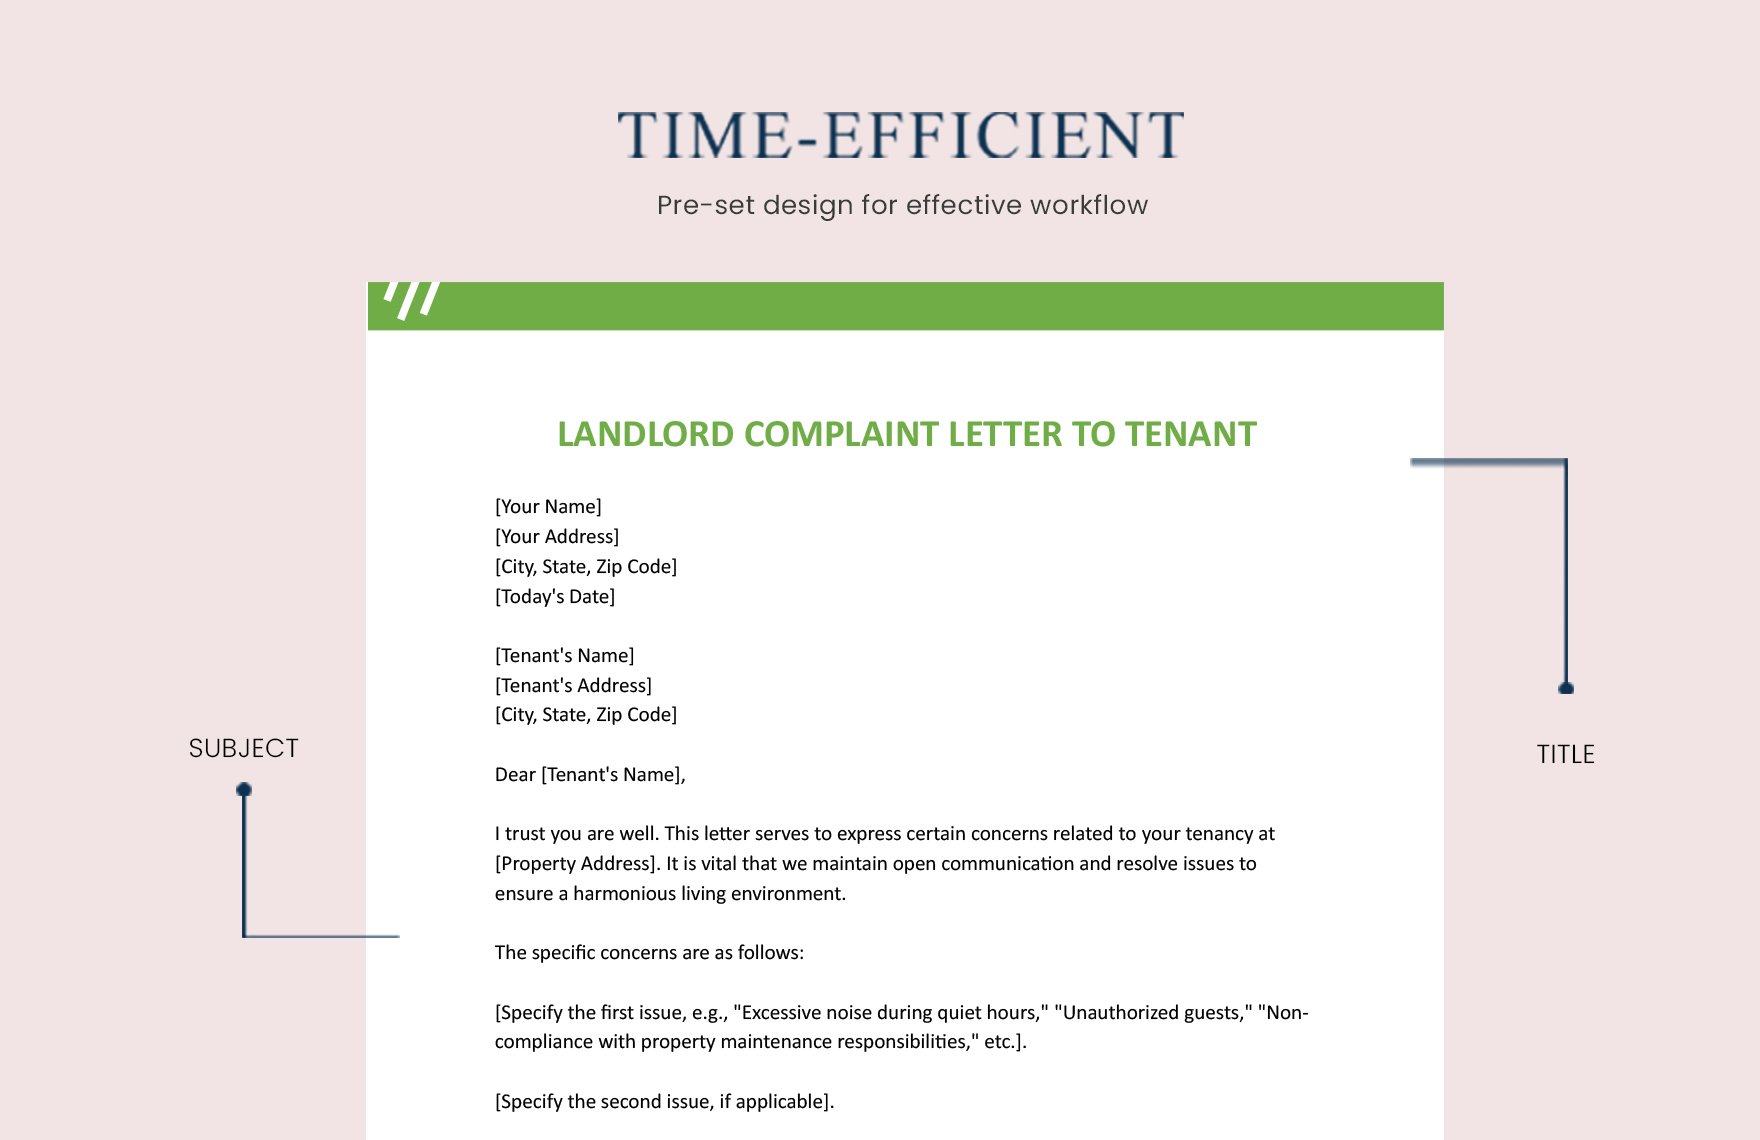 Landlord Complaint Letter To Tenant